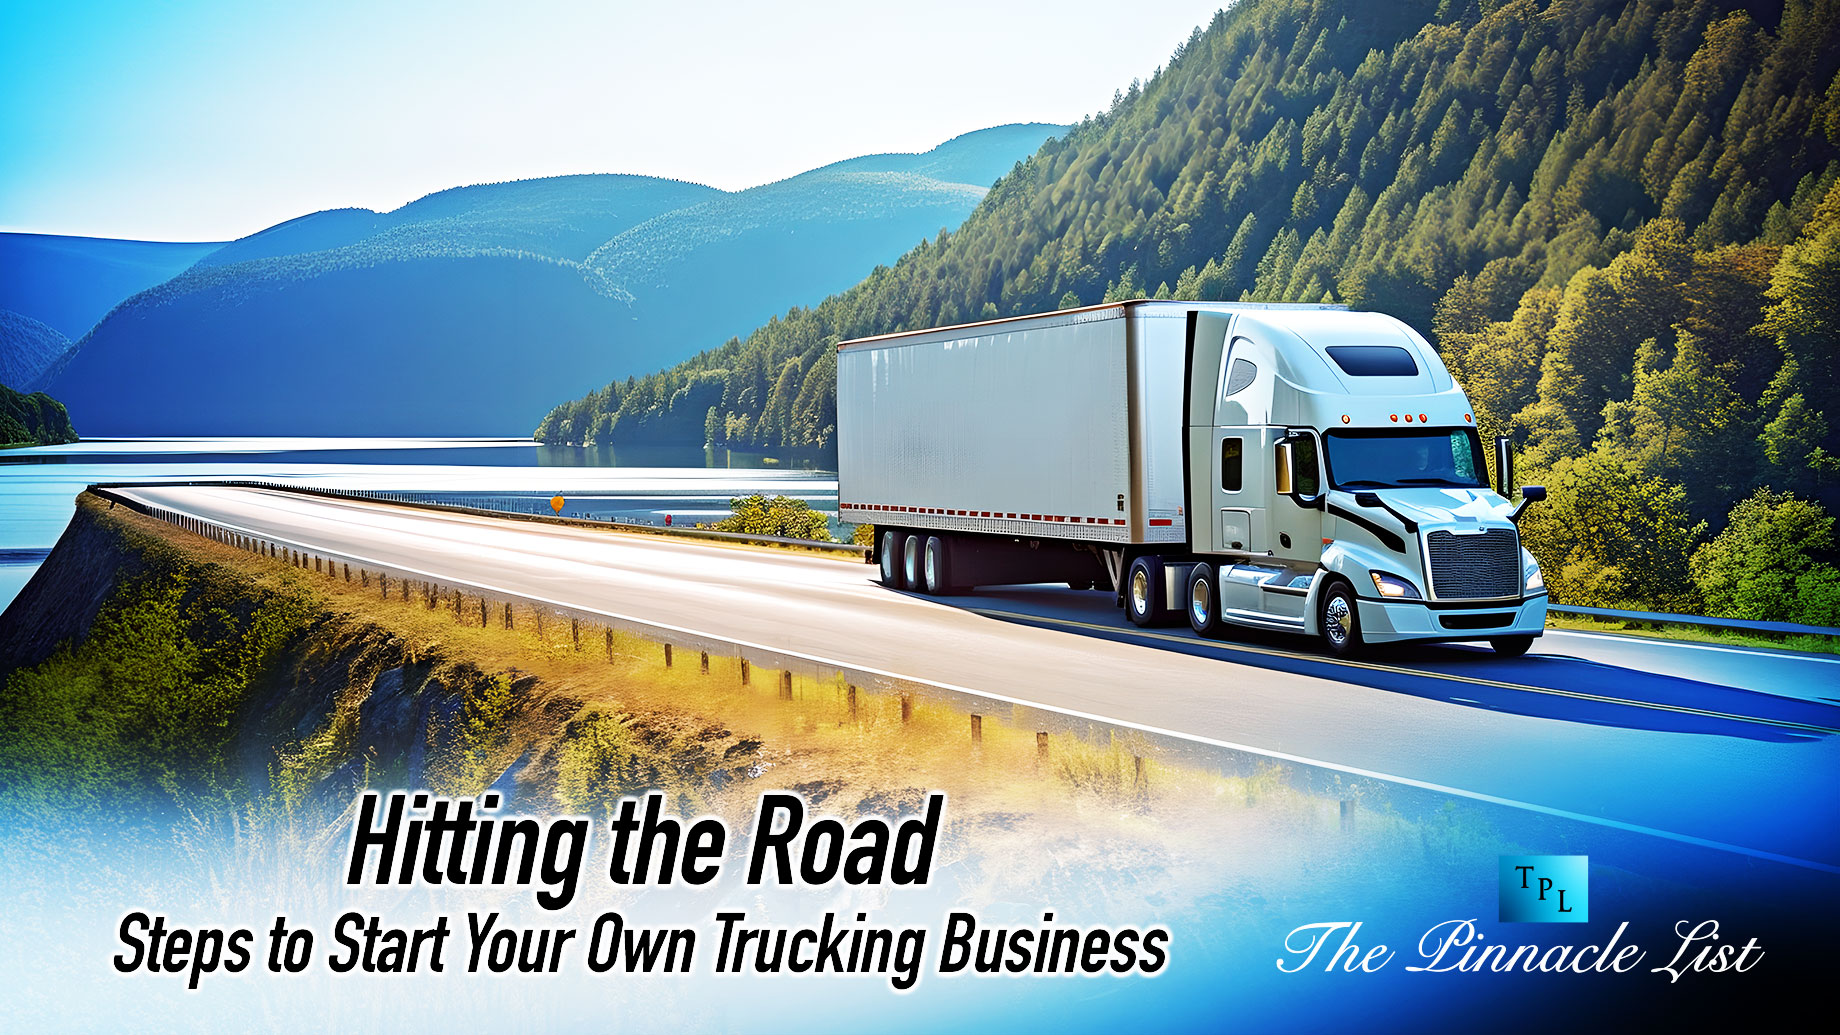 Hitting the Road: Steps to Start Your Own Trucking Business